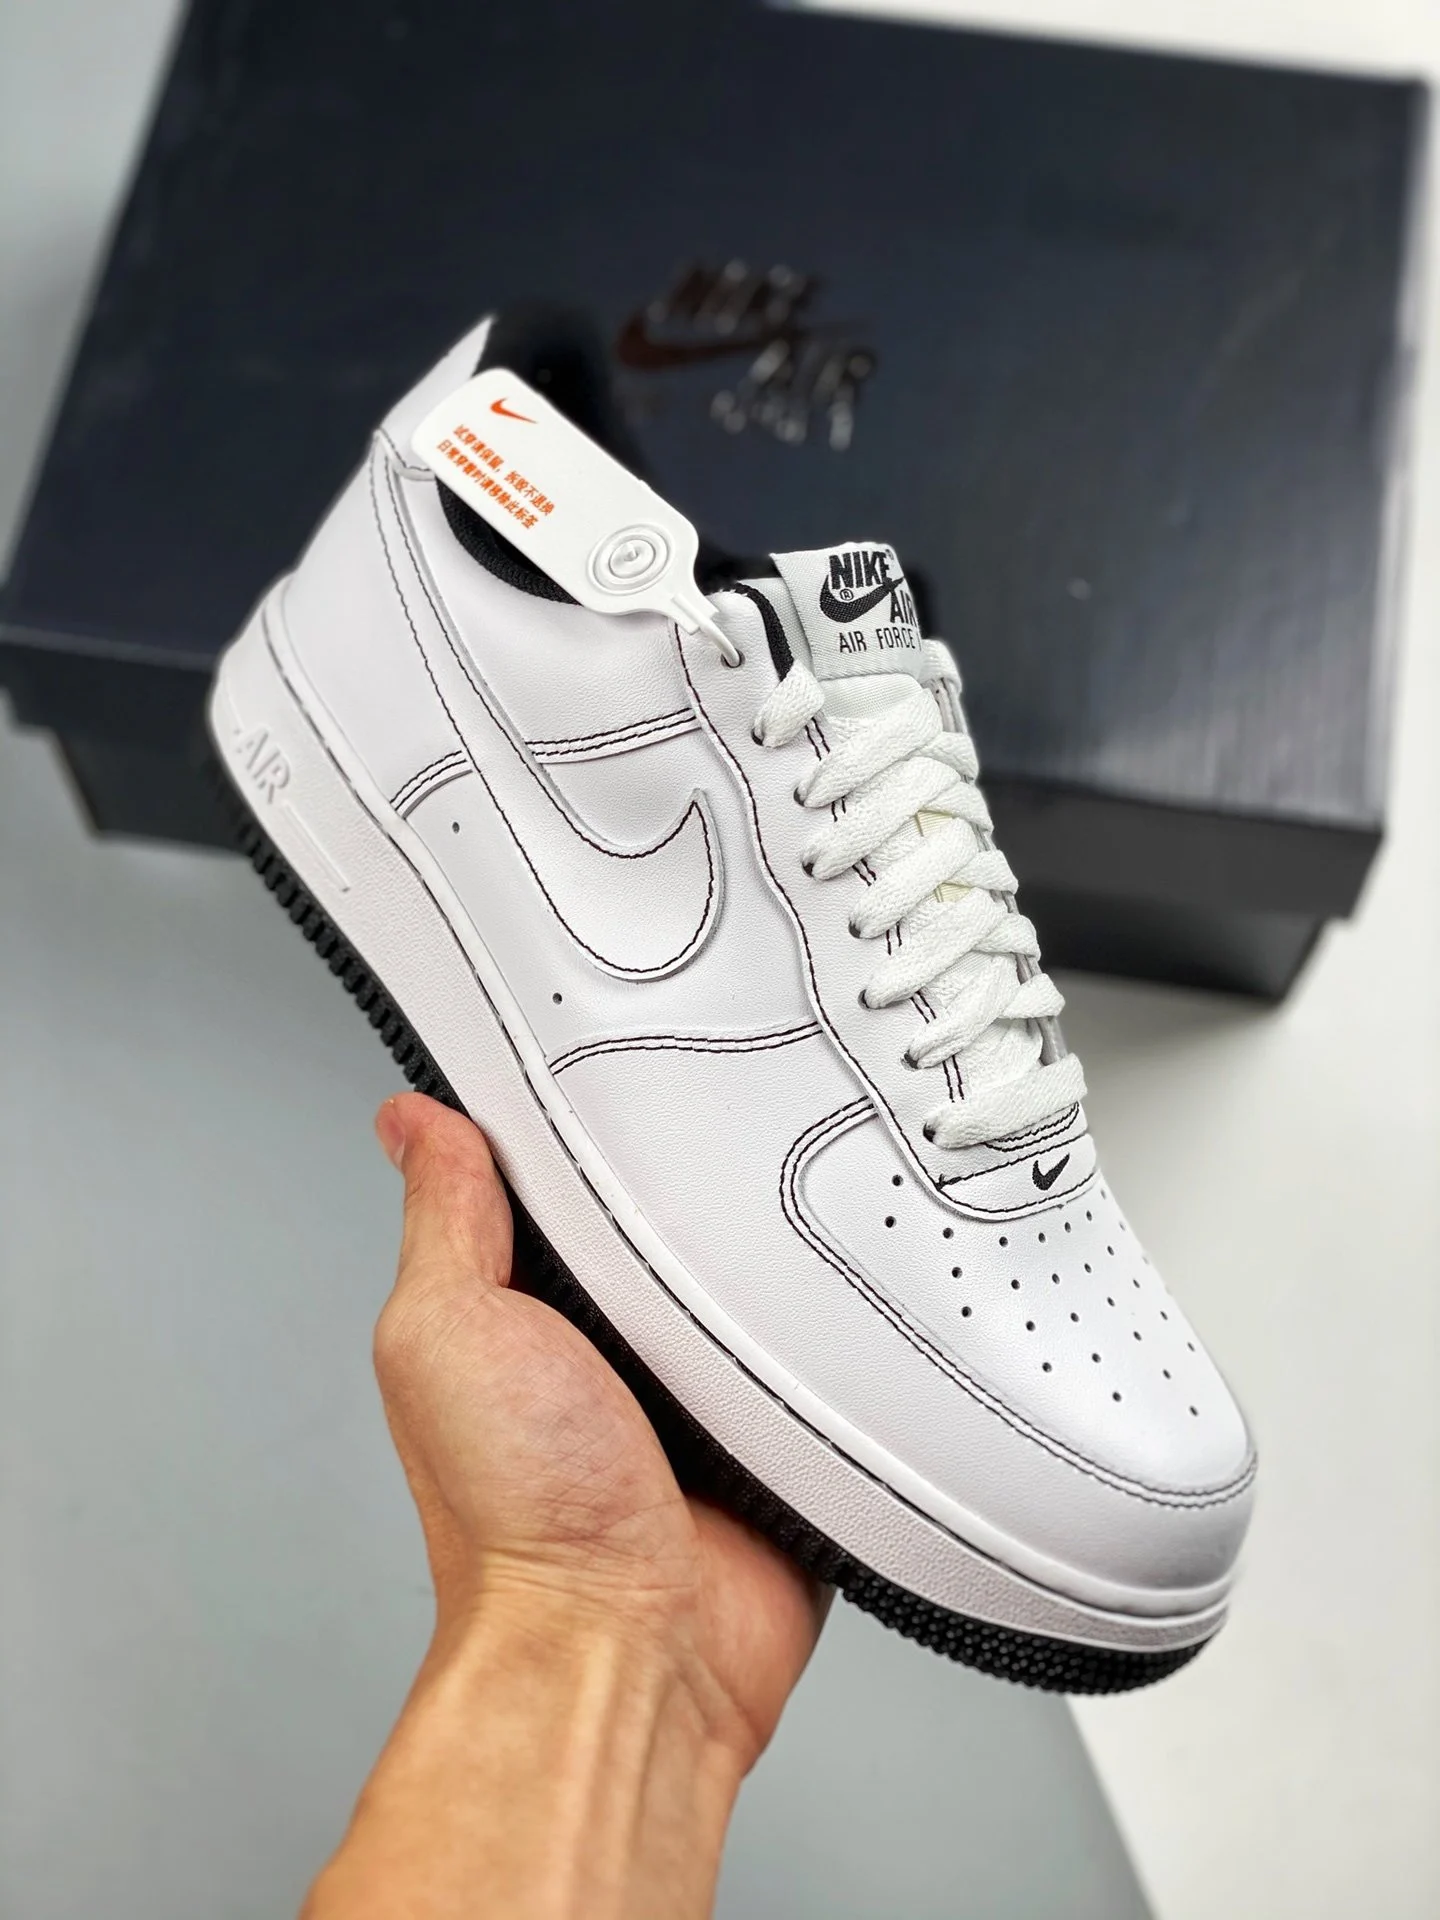 Nike Air Force 1 Low White Black CV1724-104 For Sale